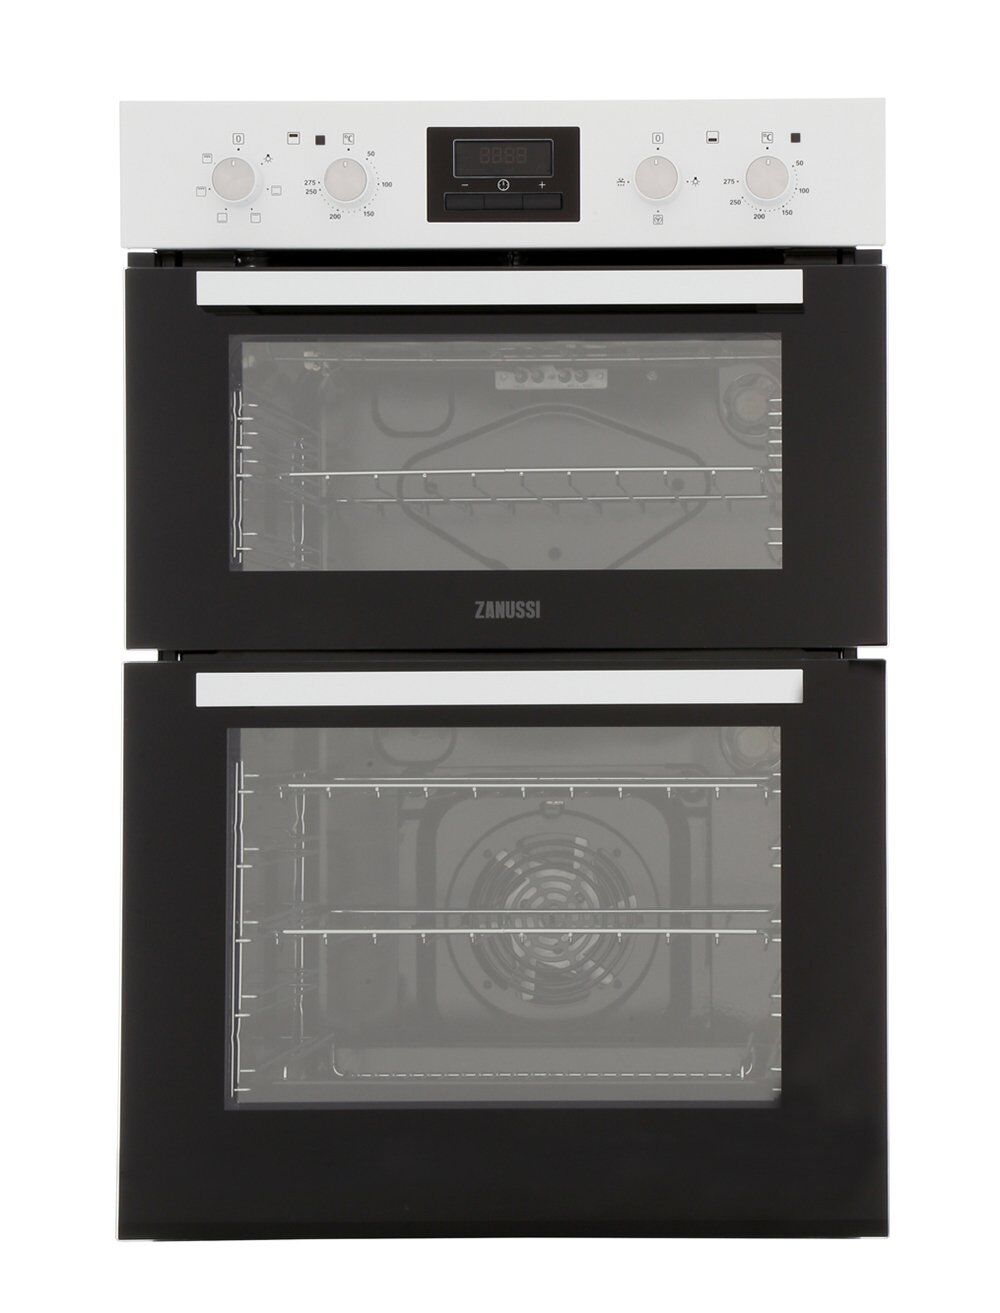 Zanussi ZOD35661WK Double Built In Electric Oven - White